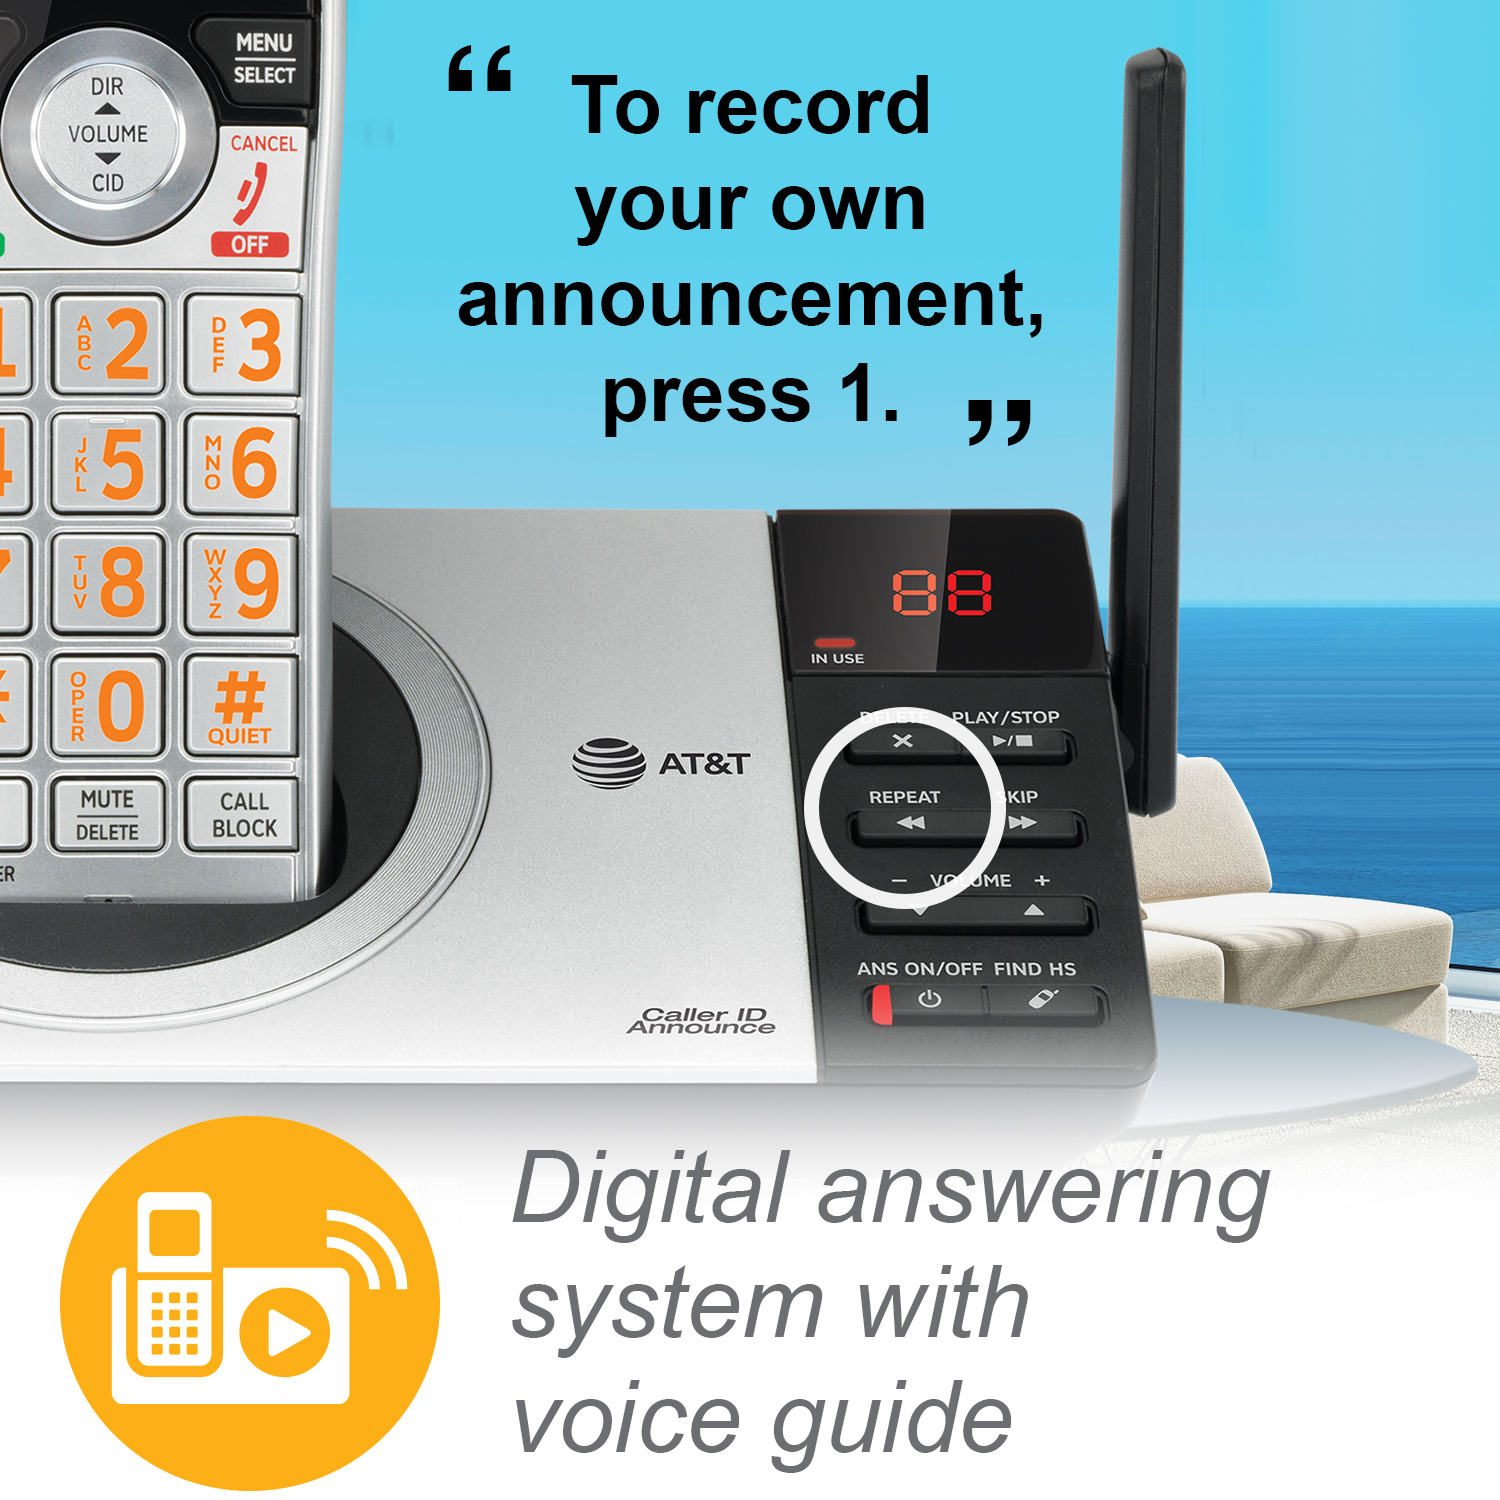 3 handset cordless answering system with smart call blocker - view 8